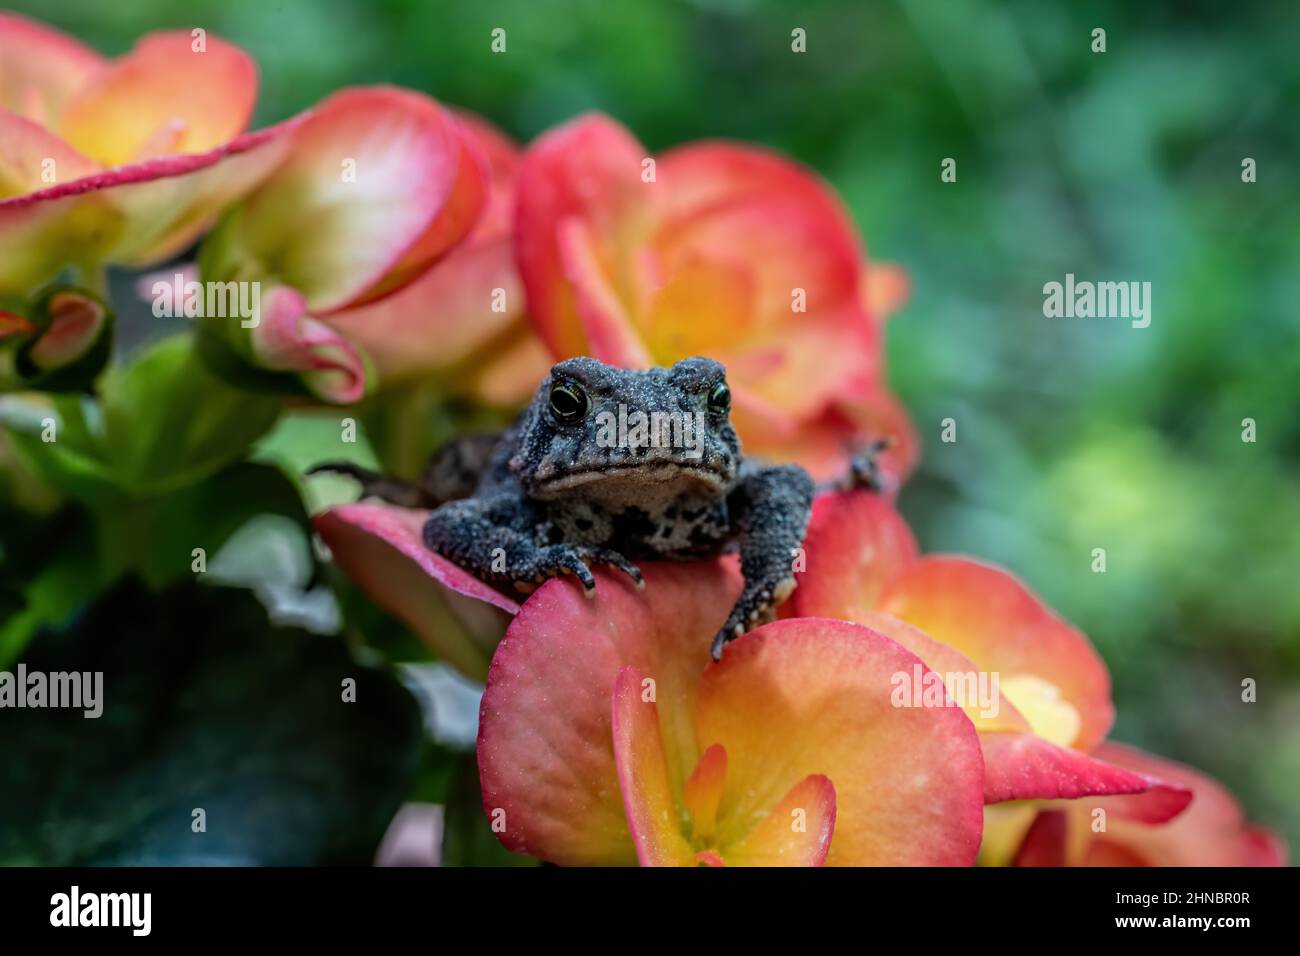 Little toad resting on orange begonia blossoms. Stock Photo